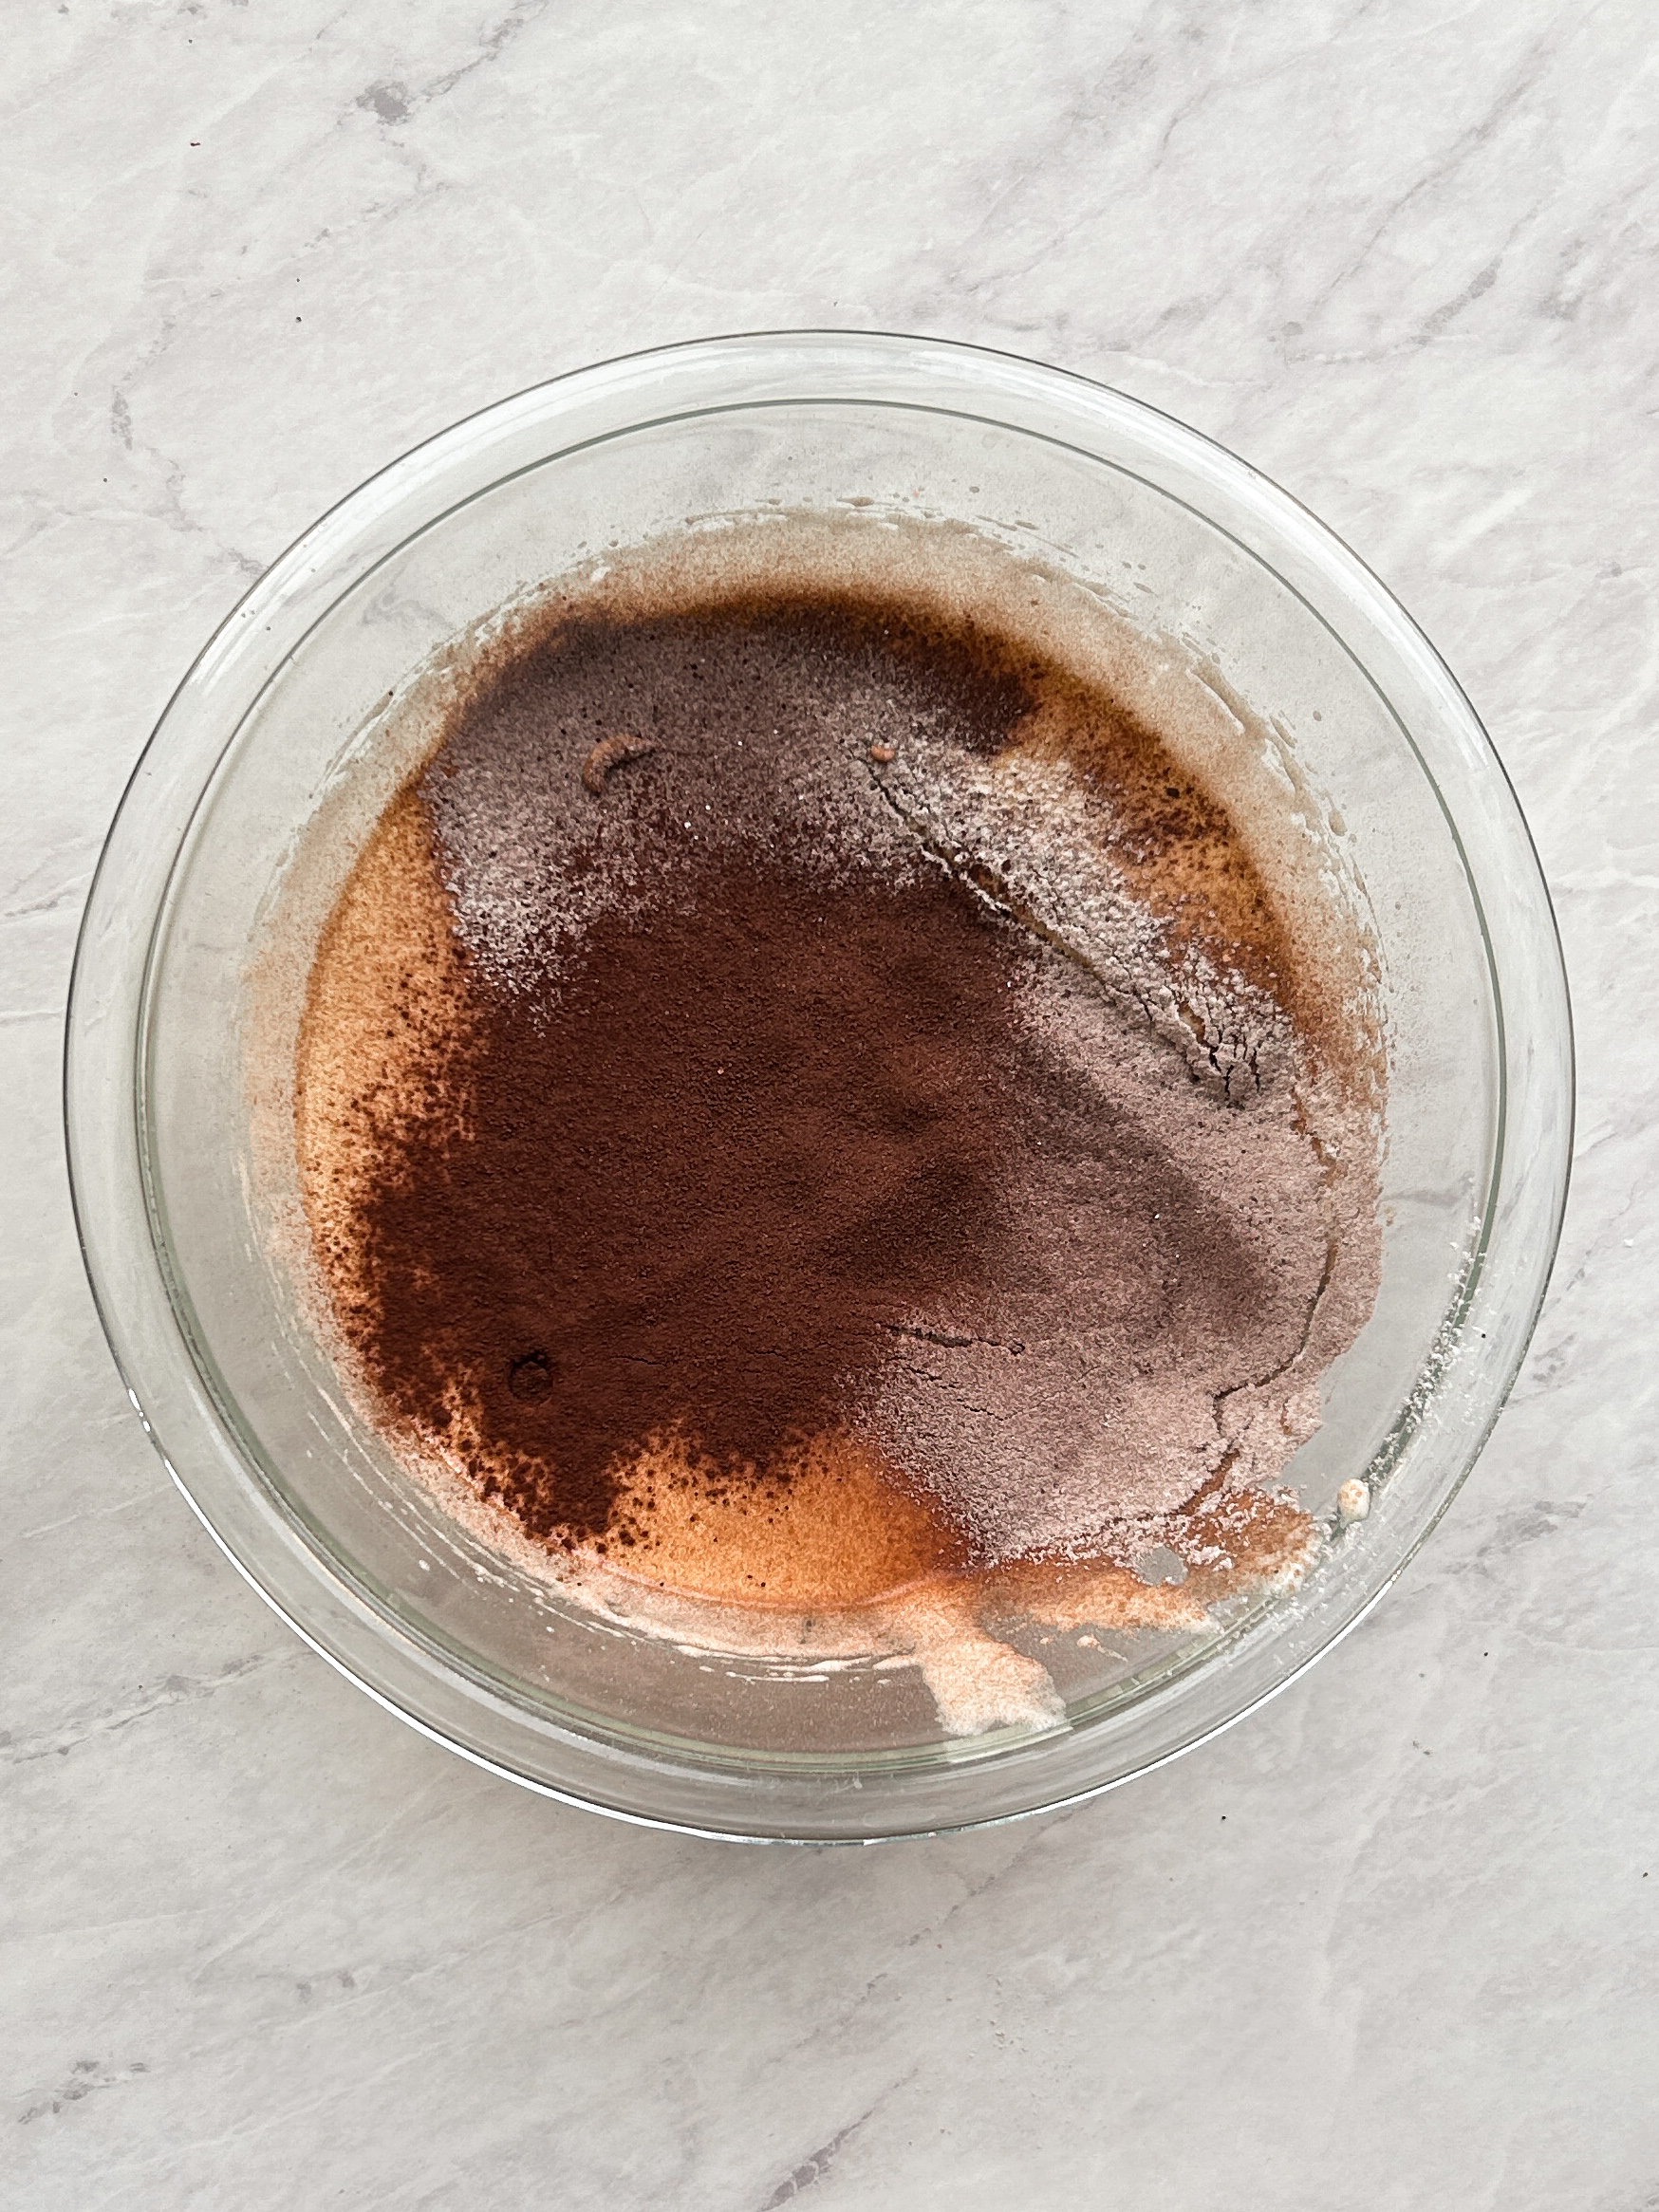 flour and cocoa powder added to eggs and sugar in a glass bowl